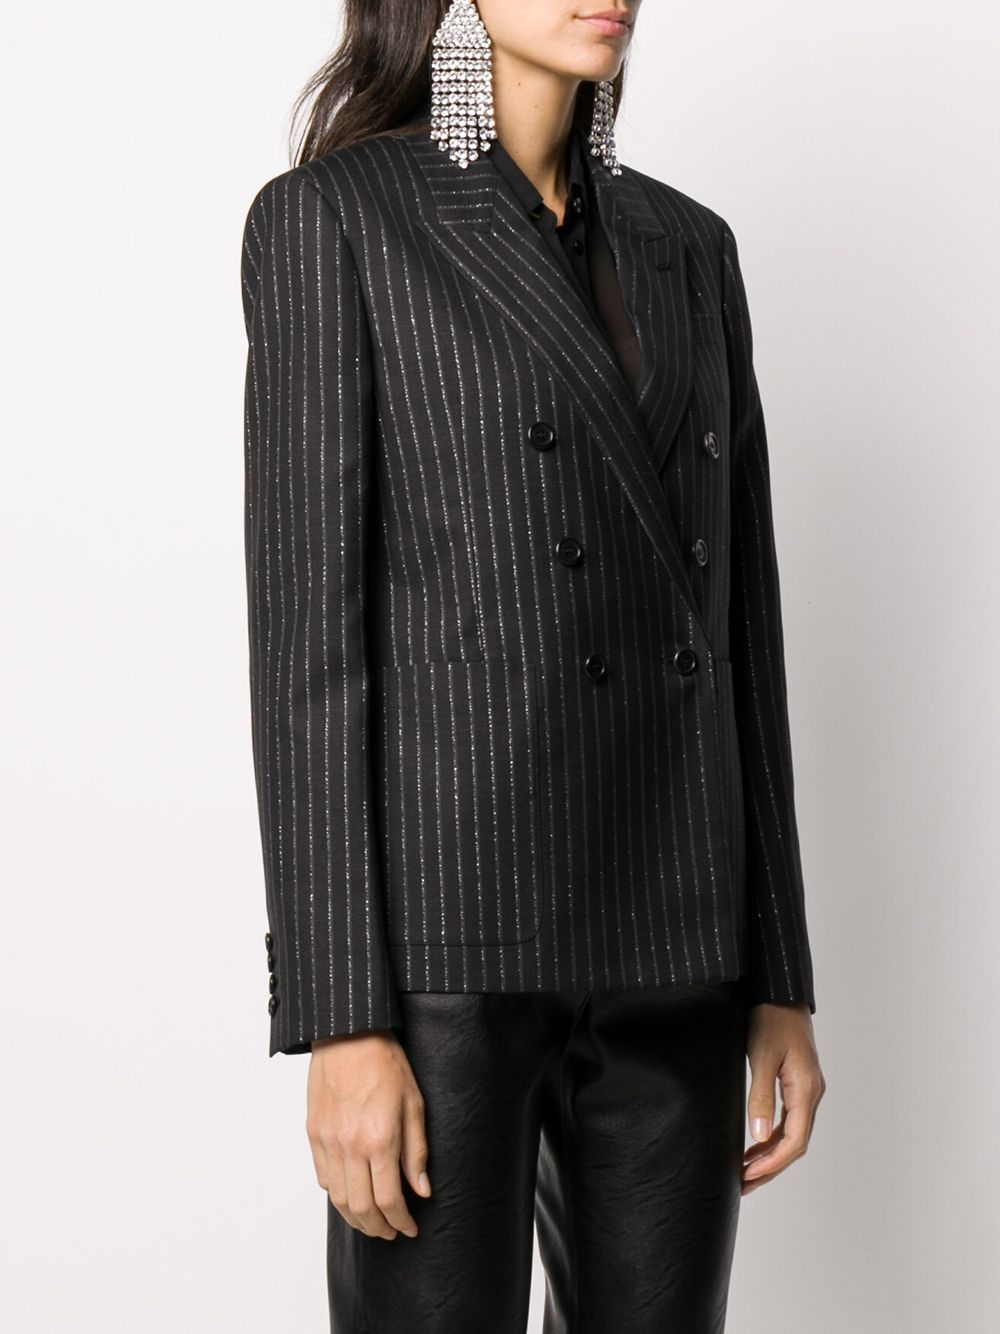 Saint Laurent Pinstriped double-breasted Blazer - Farfetch